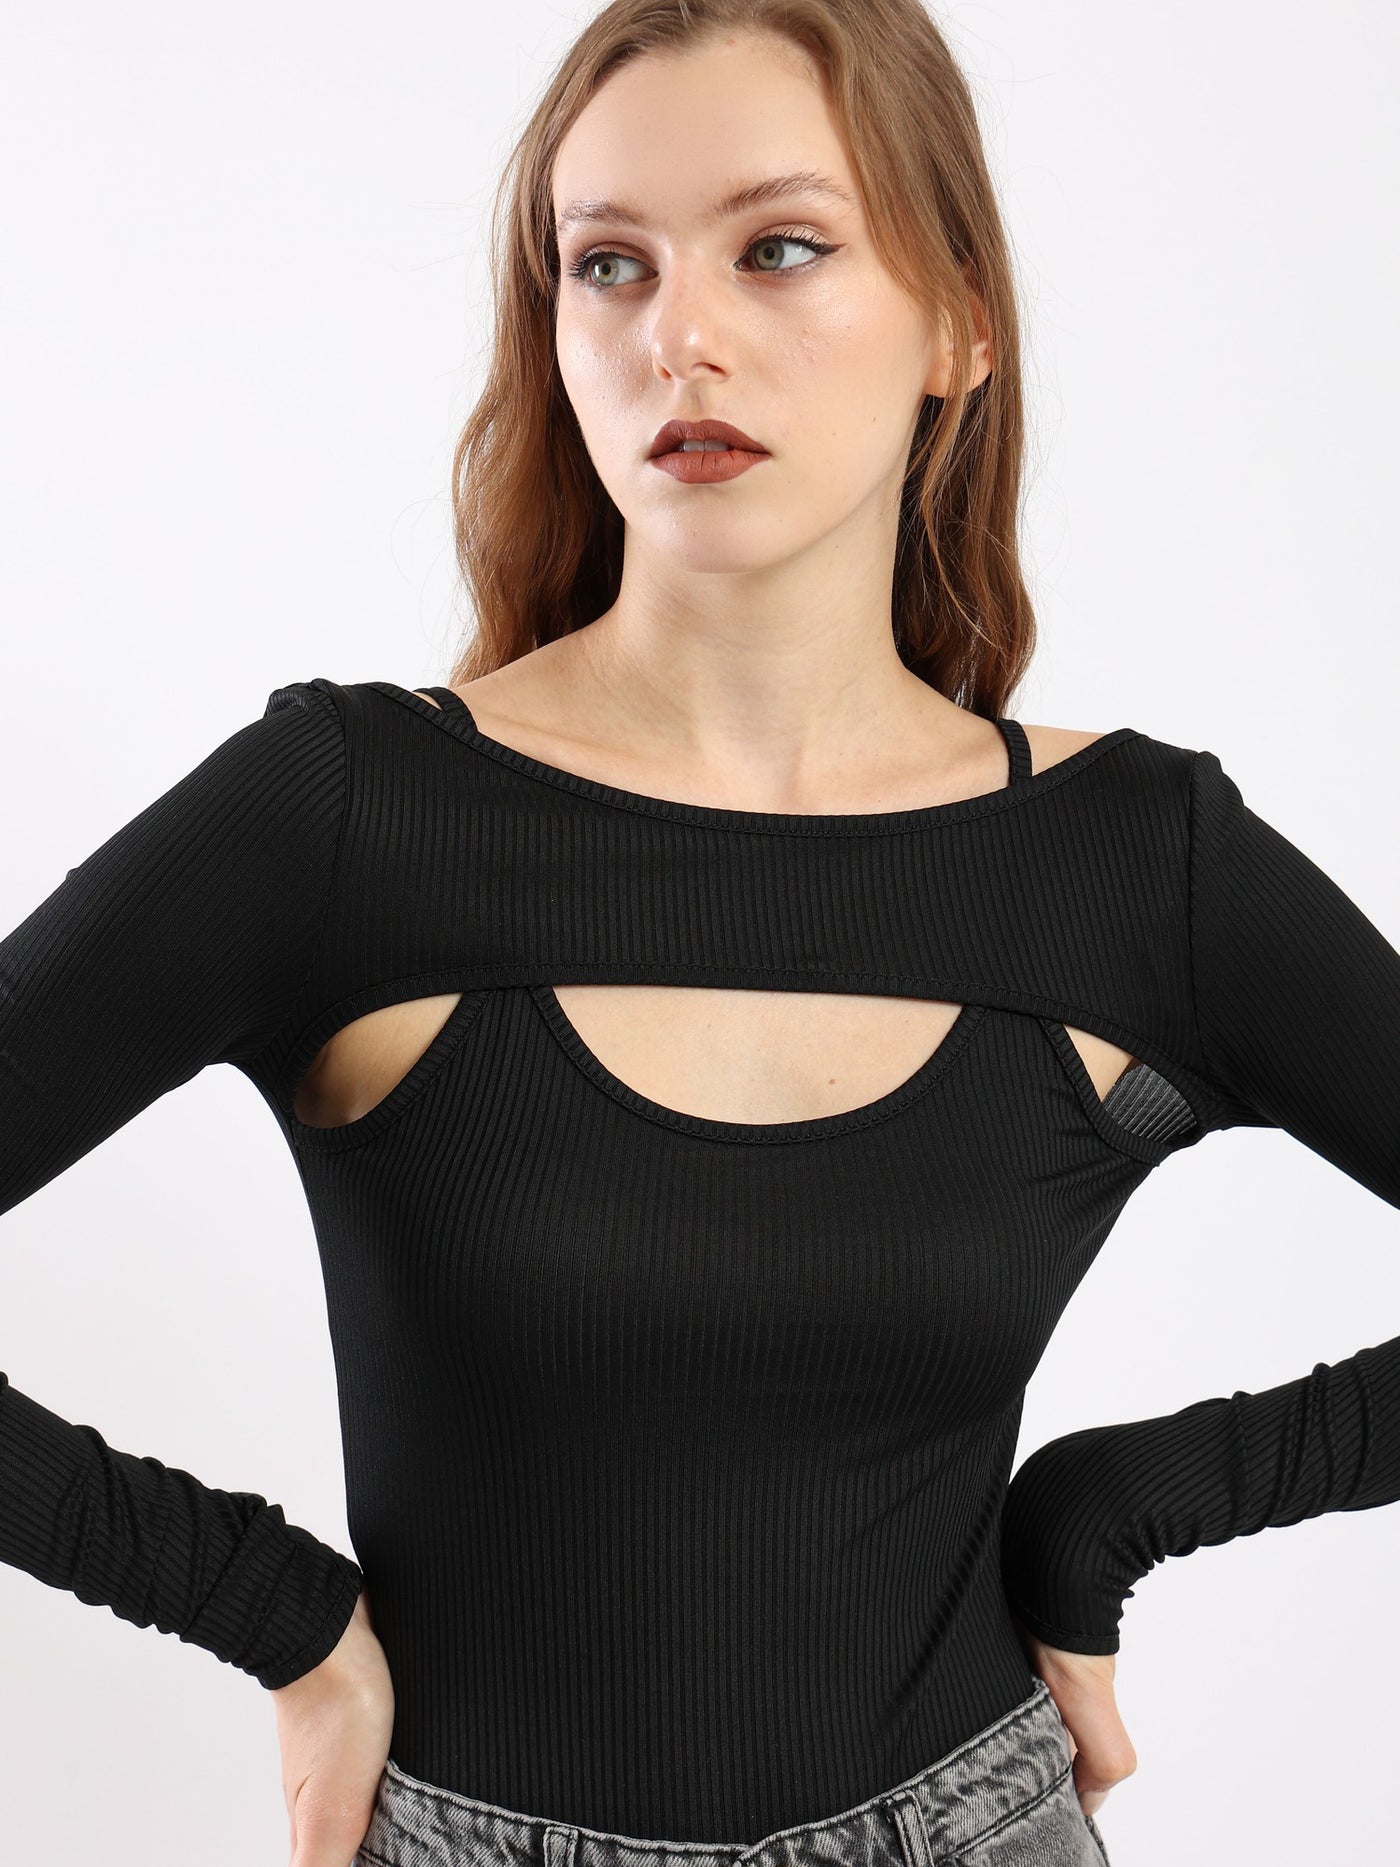 Bodysuit Top - Cut-out Design - Ribbed